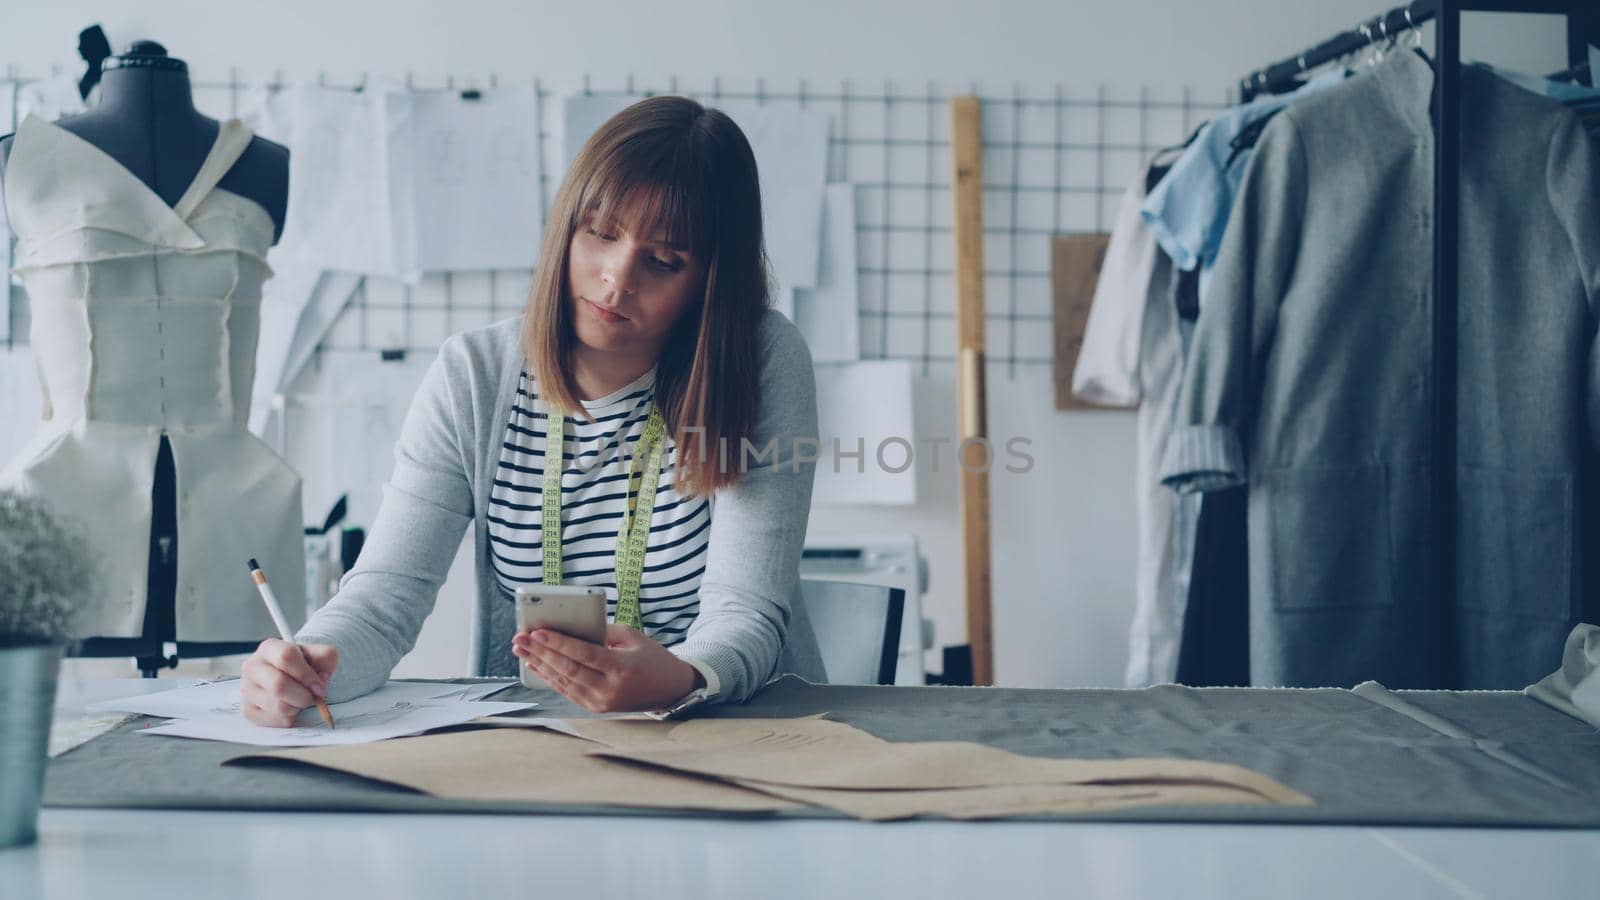 Creative clothing designer is looking at smartphone and drawing sketch while working in modern tailor shop at sewing table. Woman is busy and involved in process. by silverkblack